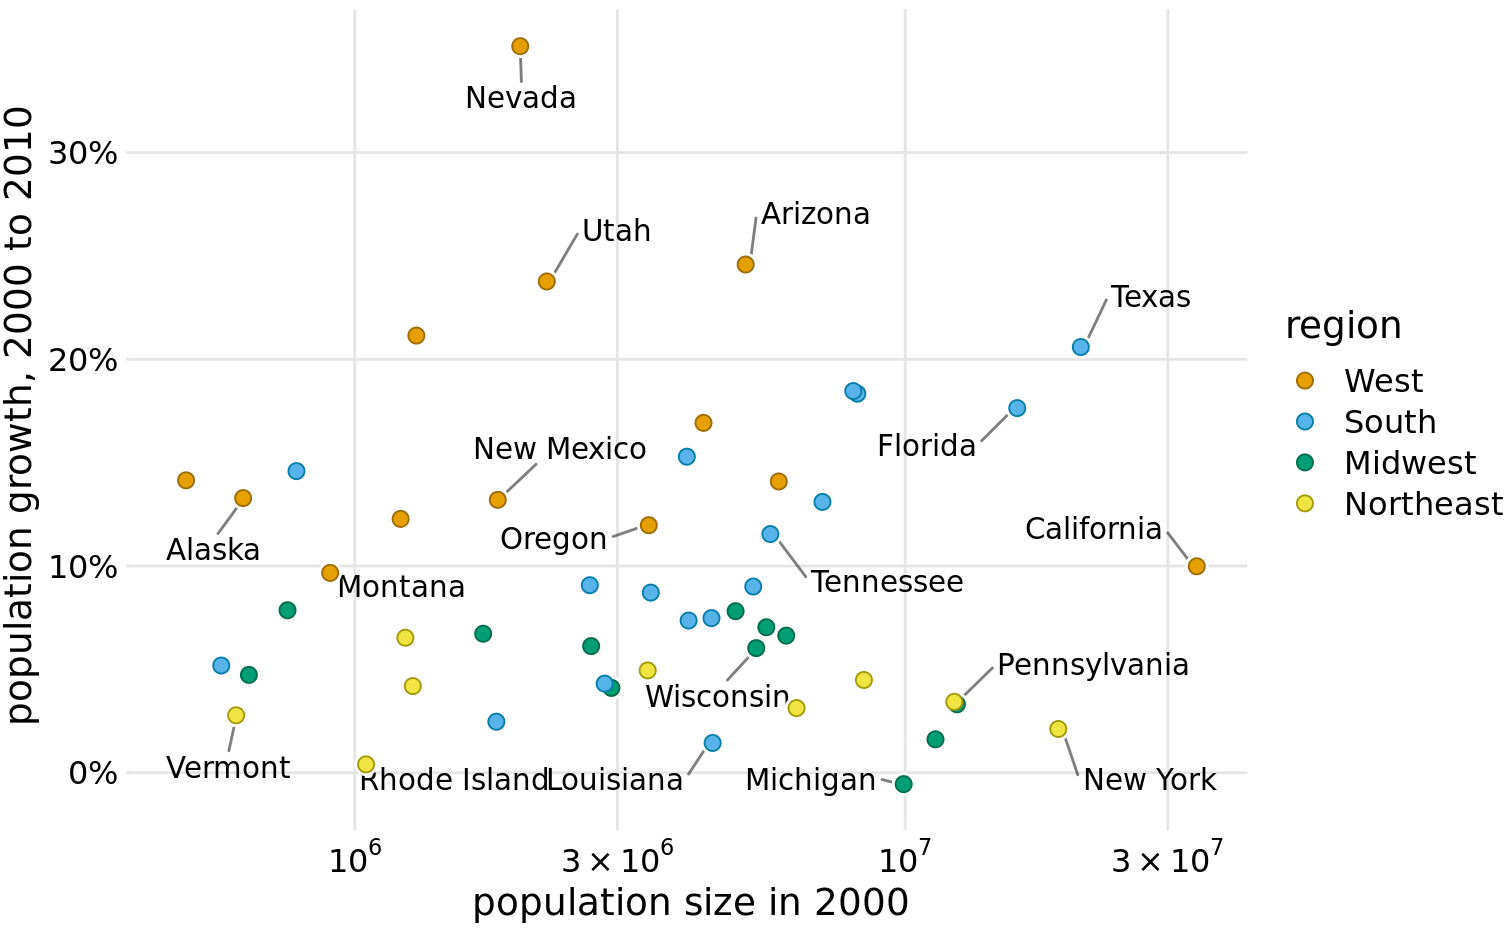 Population growth from 2000 to 2010 versus population size in 2000. In contrast to Figure 19.1, I have now colored states by region and have directly labeled a subset of states. The majority of states have been left unlabeled to keep the figure from overcrowding. Data source: U.S. Census Bureau